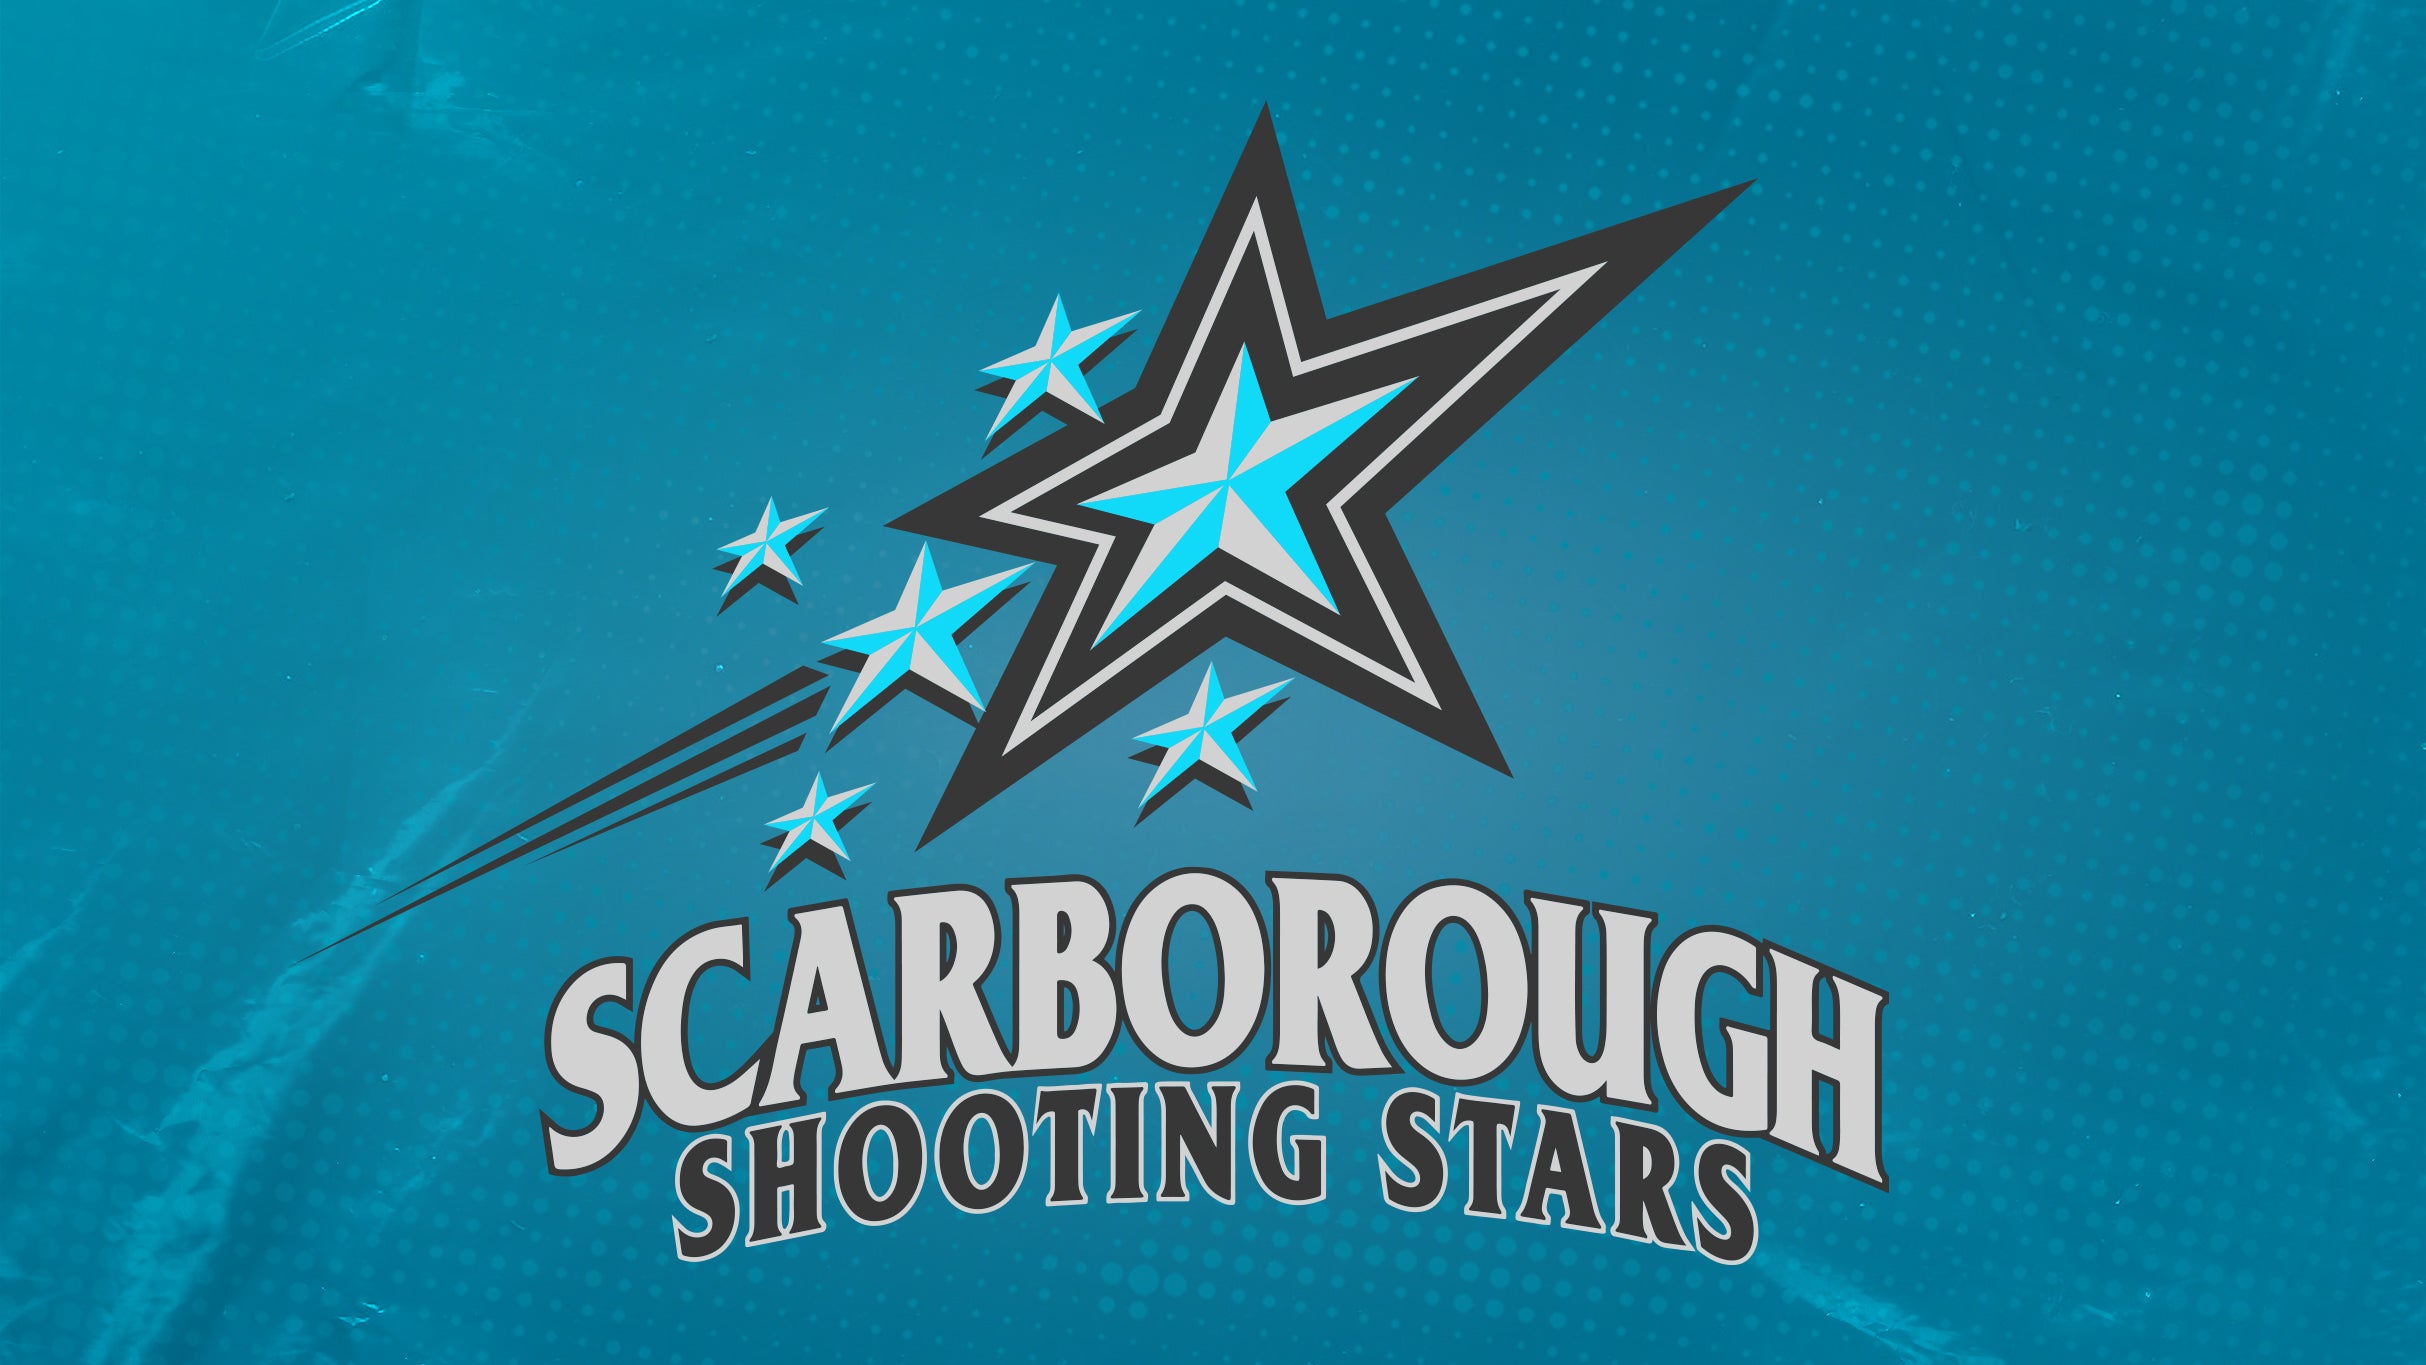 Scarborough Shooting Stars vs. Montreal Alliance pre-sale password for real tickets in Toronto